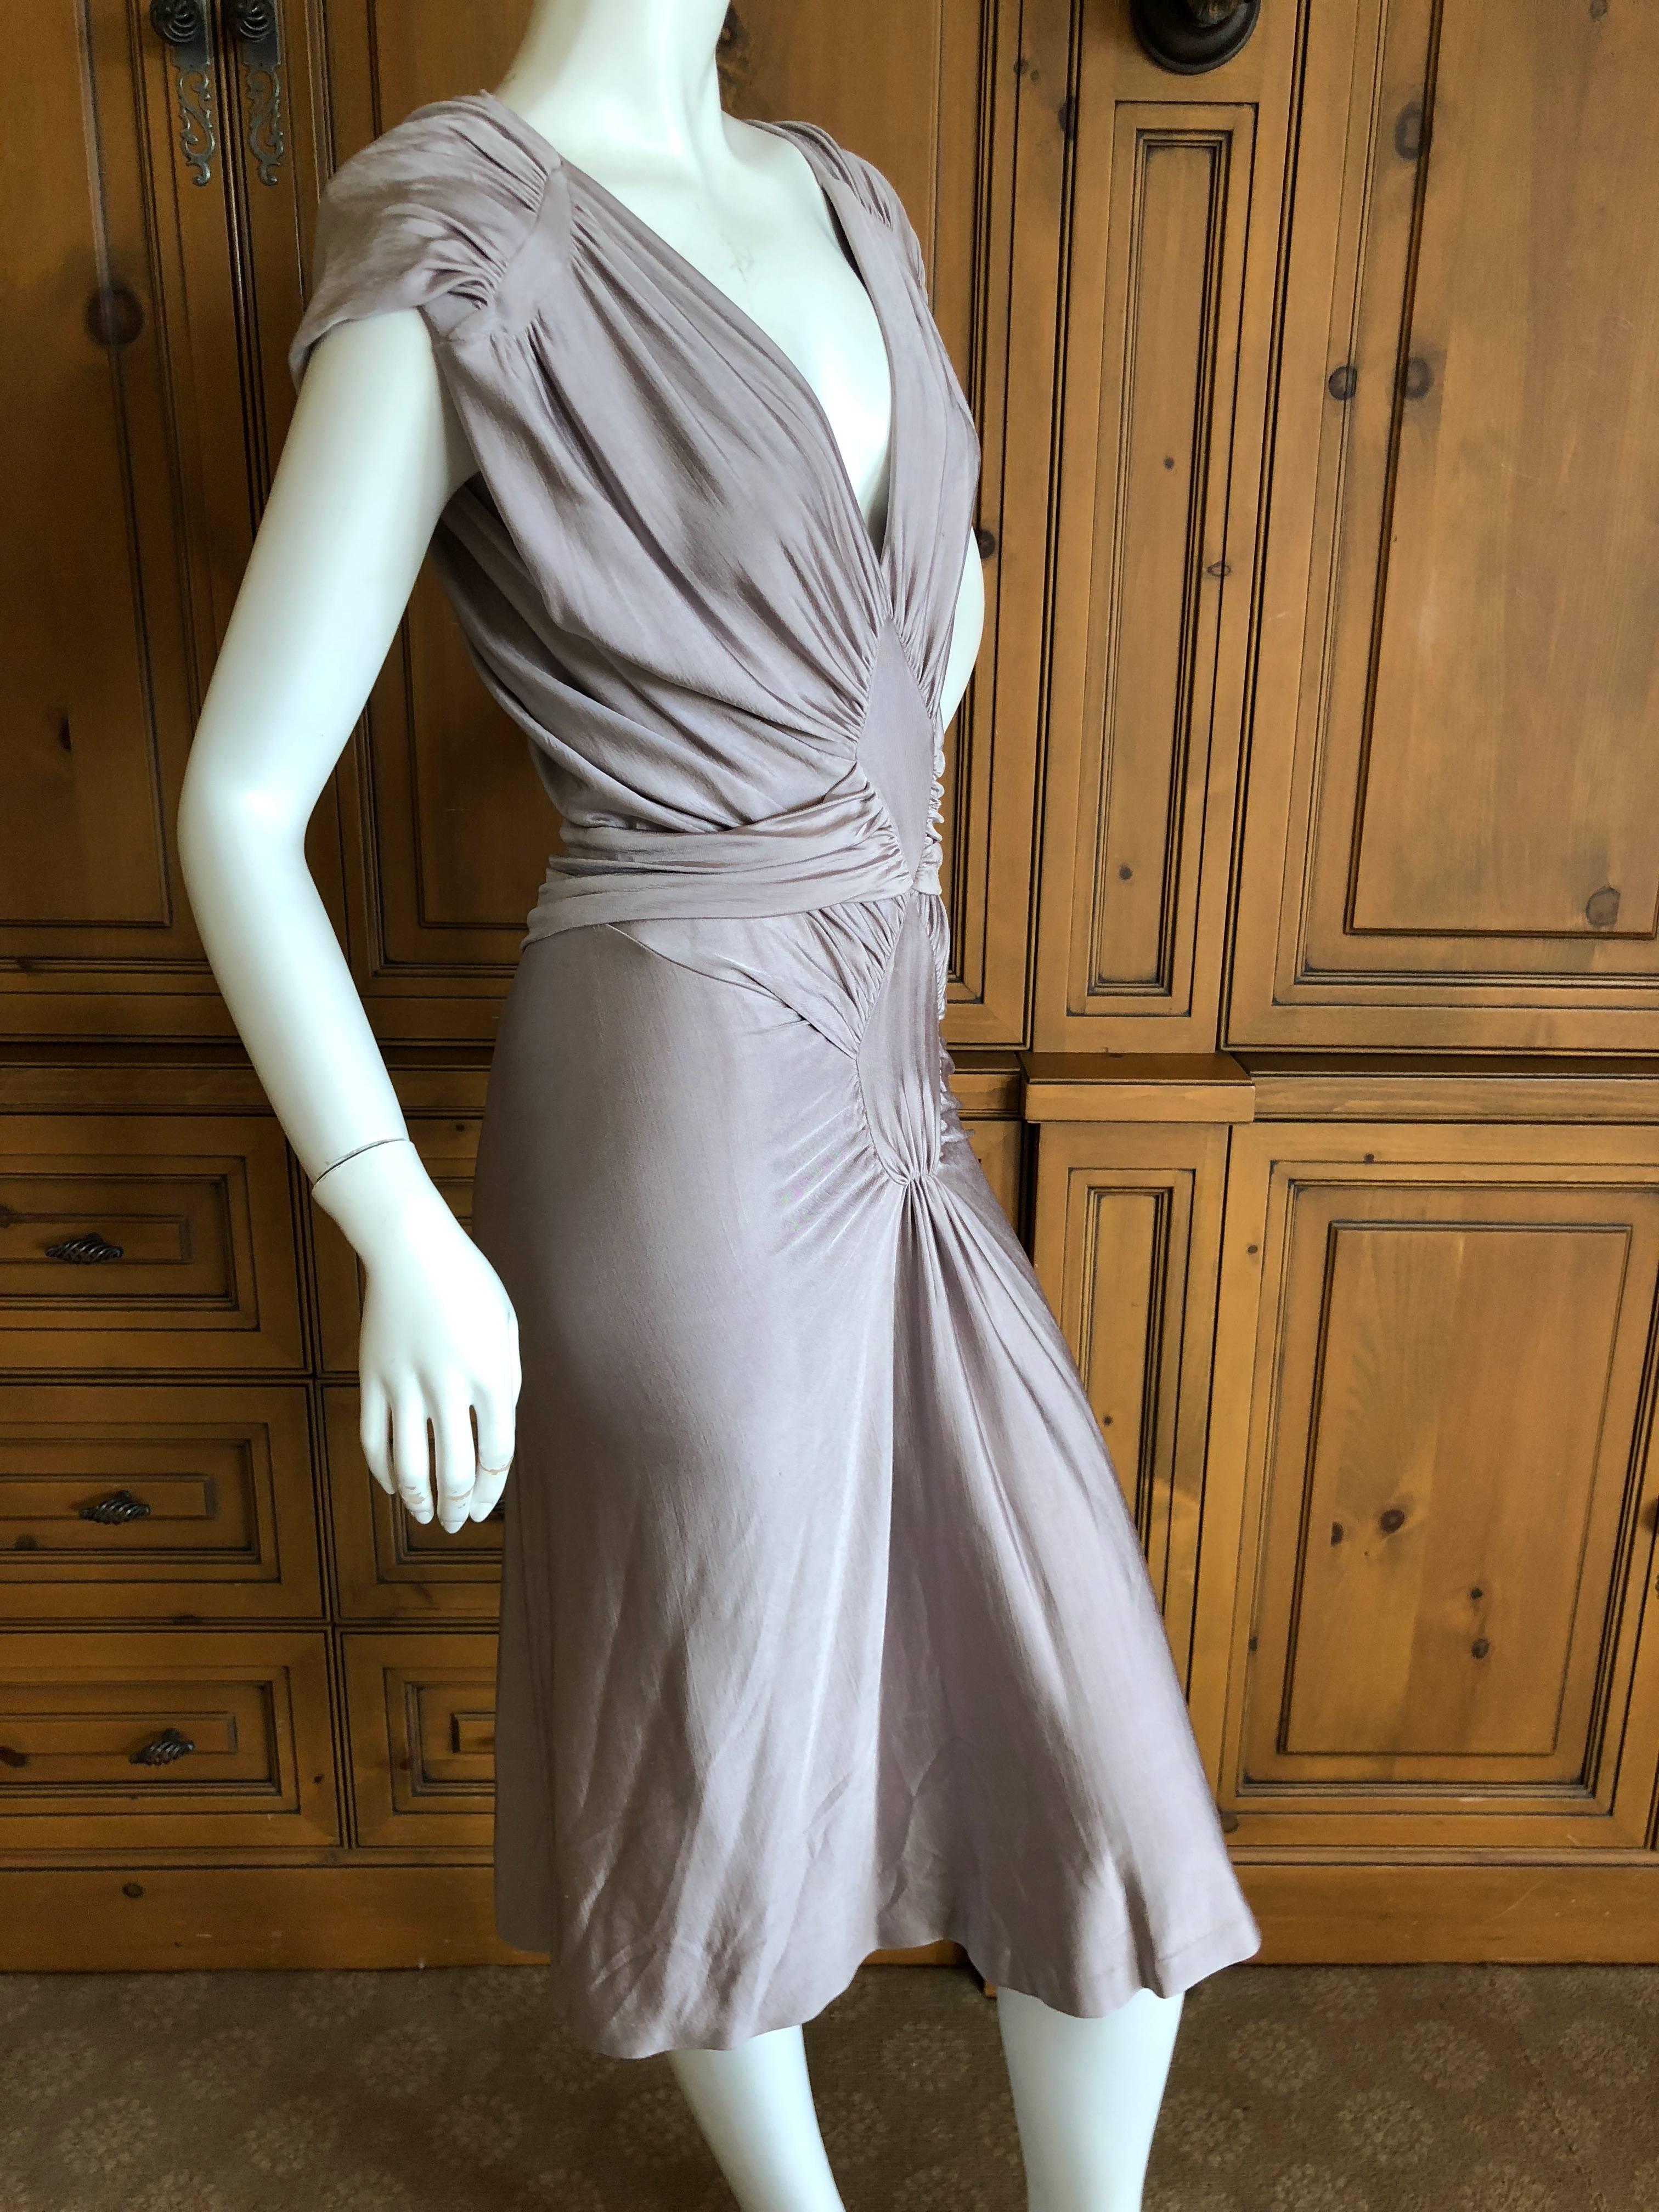 Yves Saint Laurent by Tom Ford Silvery Lilac Ruched Evening Dress

In Tom Ford book on Cameron Diaz

Size S

 New with Tags

 Bust 34